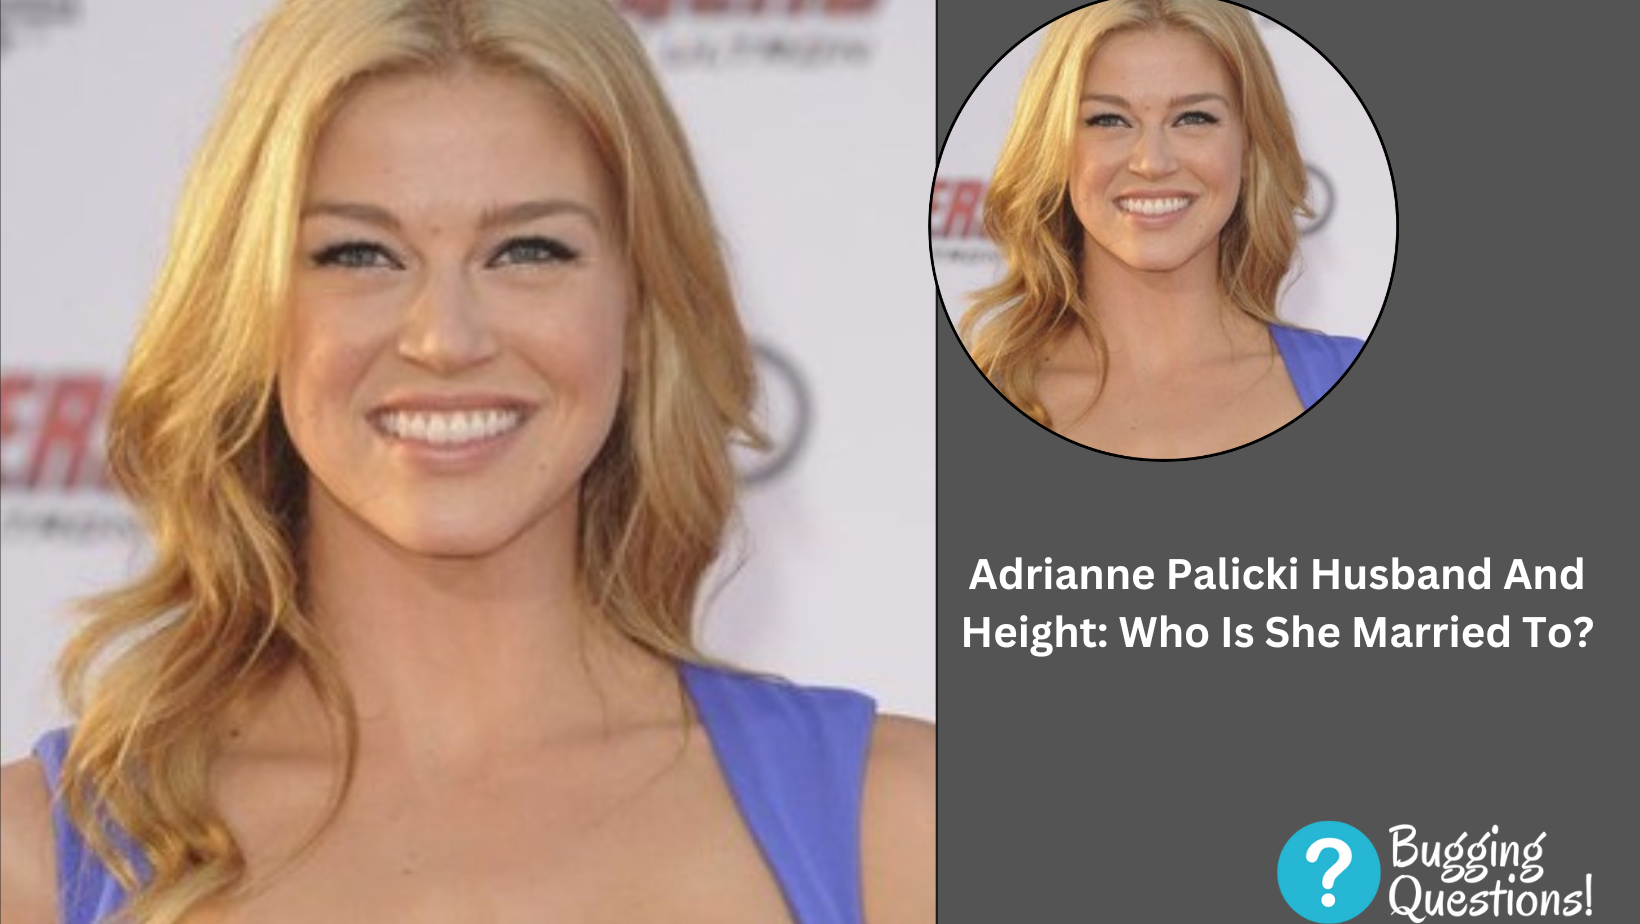 Adrianne Palicki Husband And Height: Who Is She Married To?